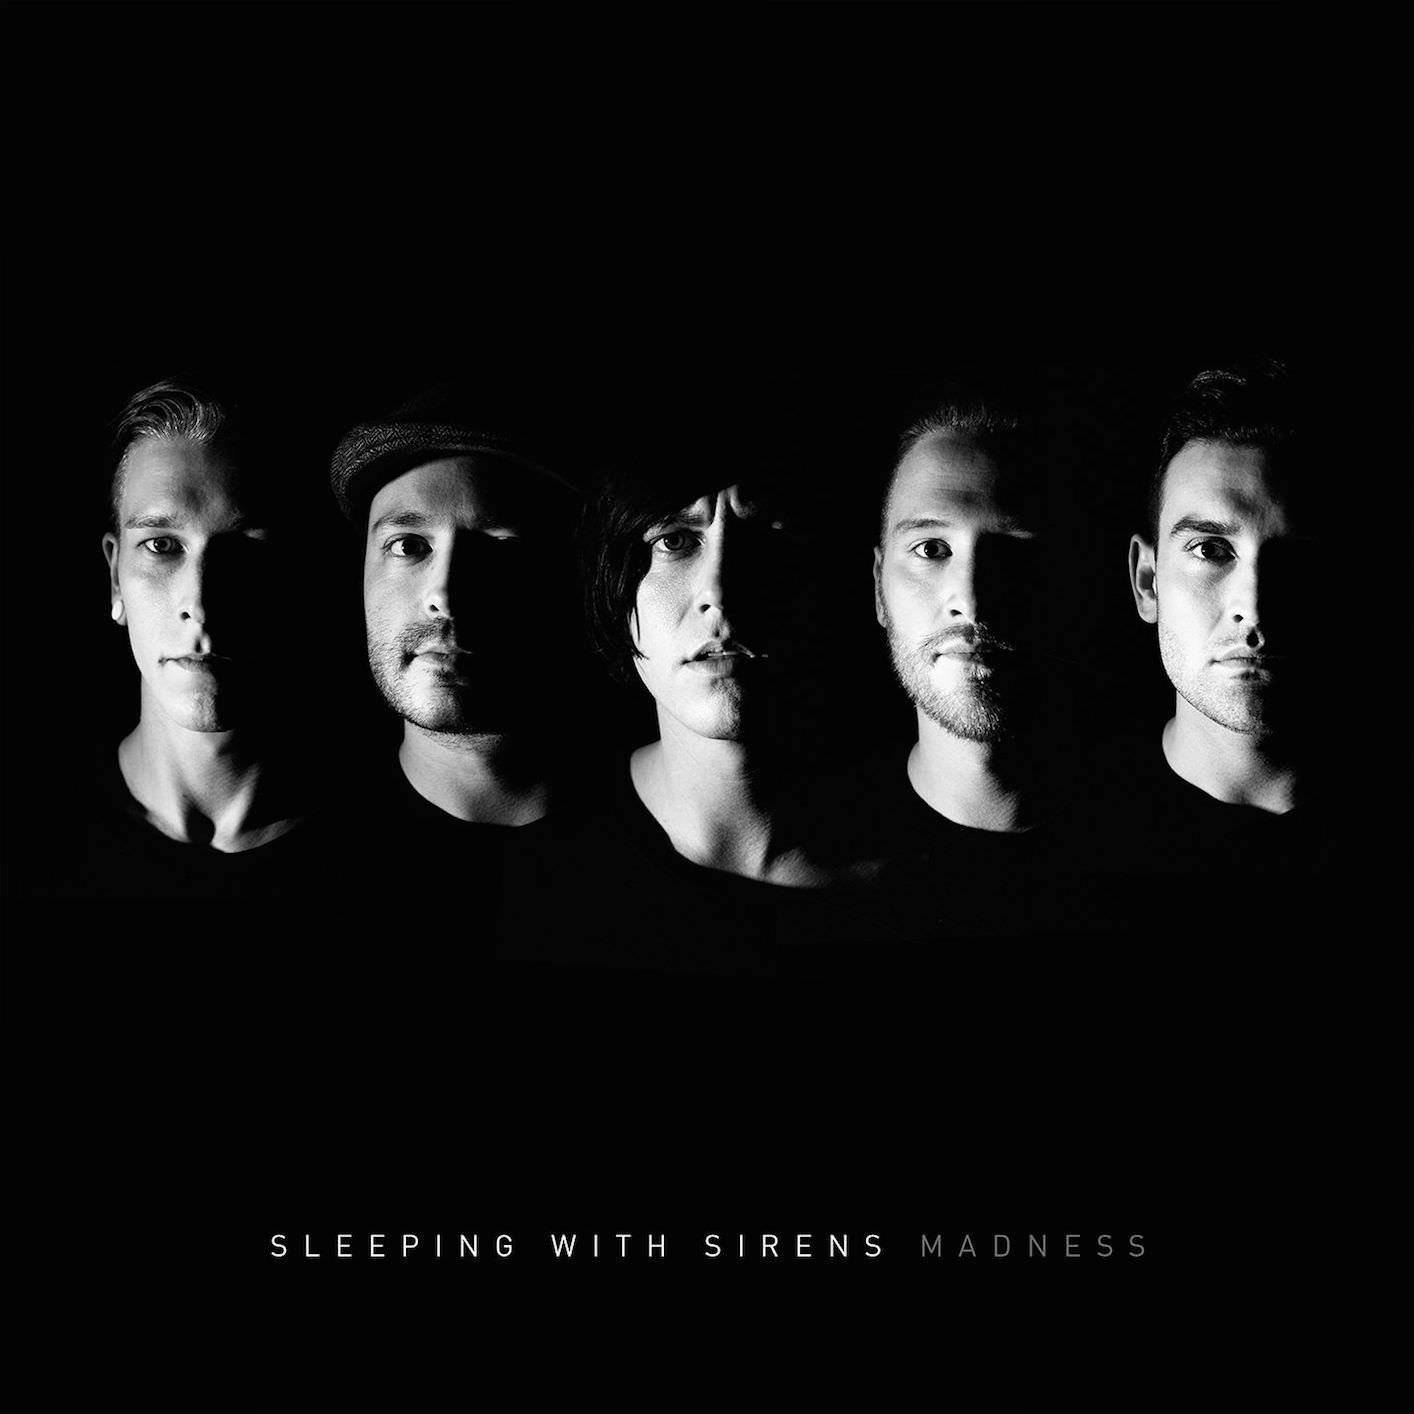 Sleeping With Sirens – Madness {Deluxe Edition} (2015) [HDTracks FLAC 24bit/44,1kHz]